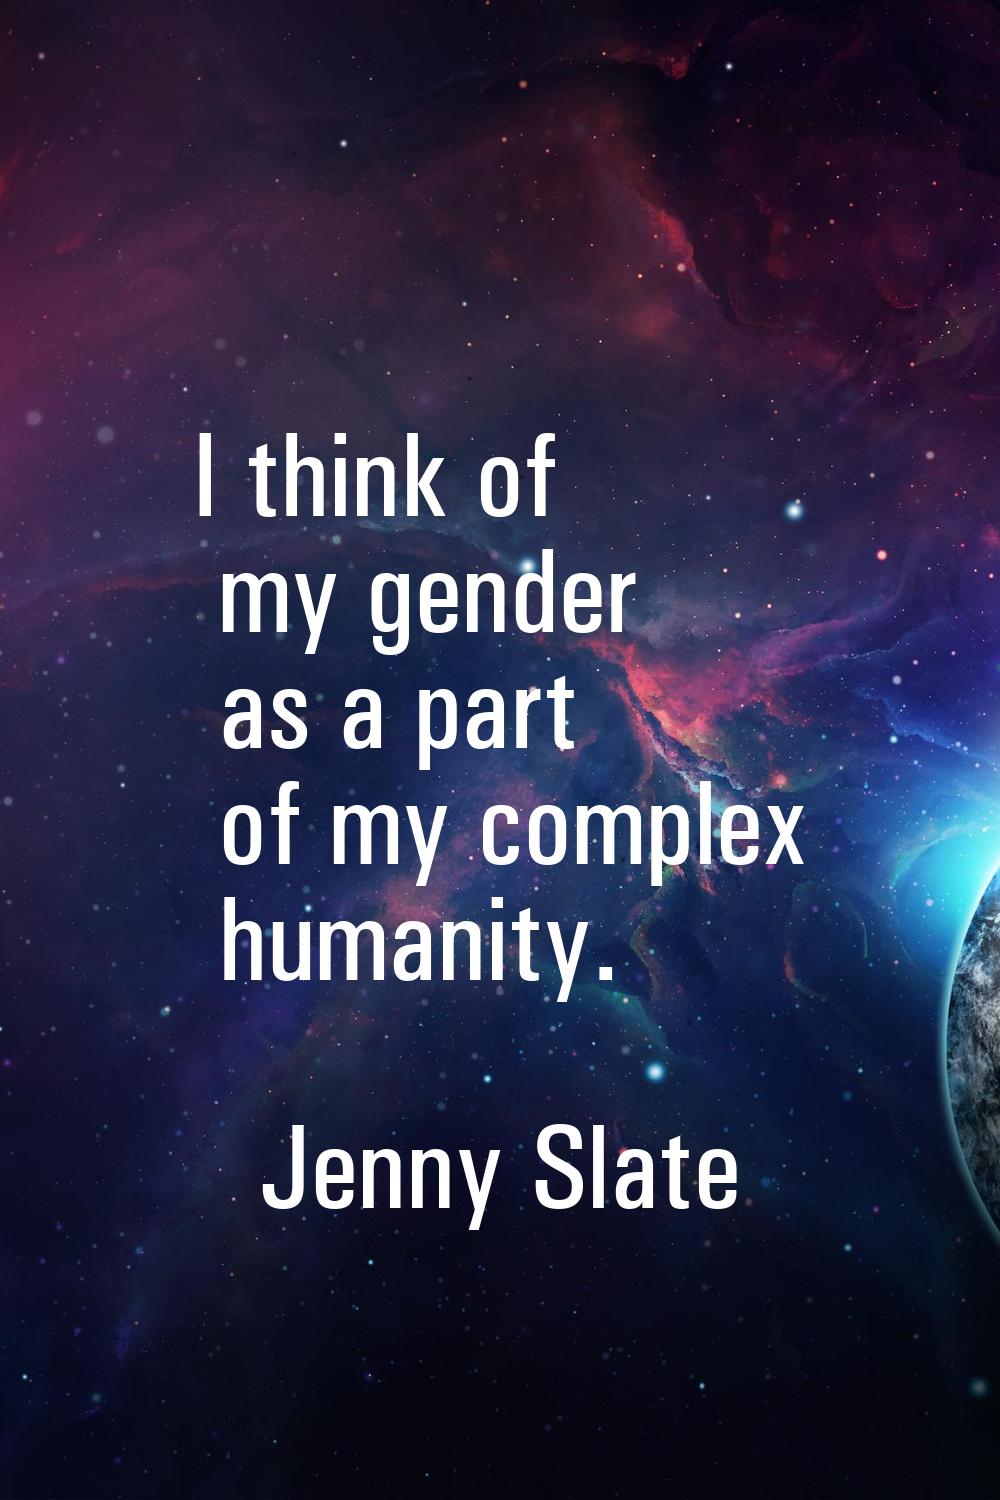 I think of my gender as a part of my complex humanity.